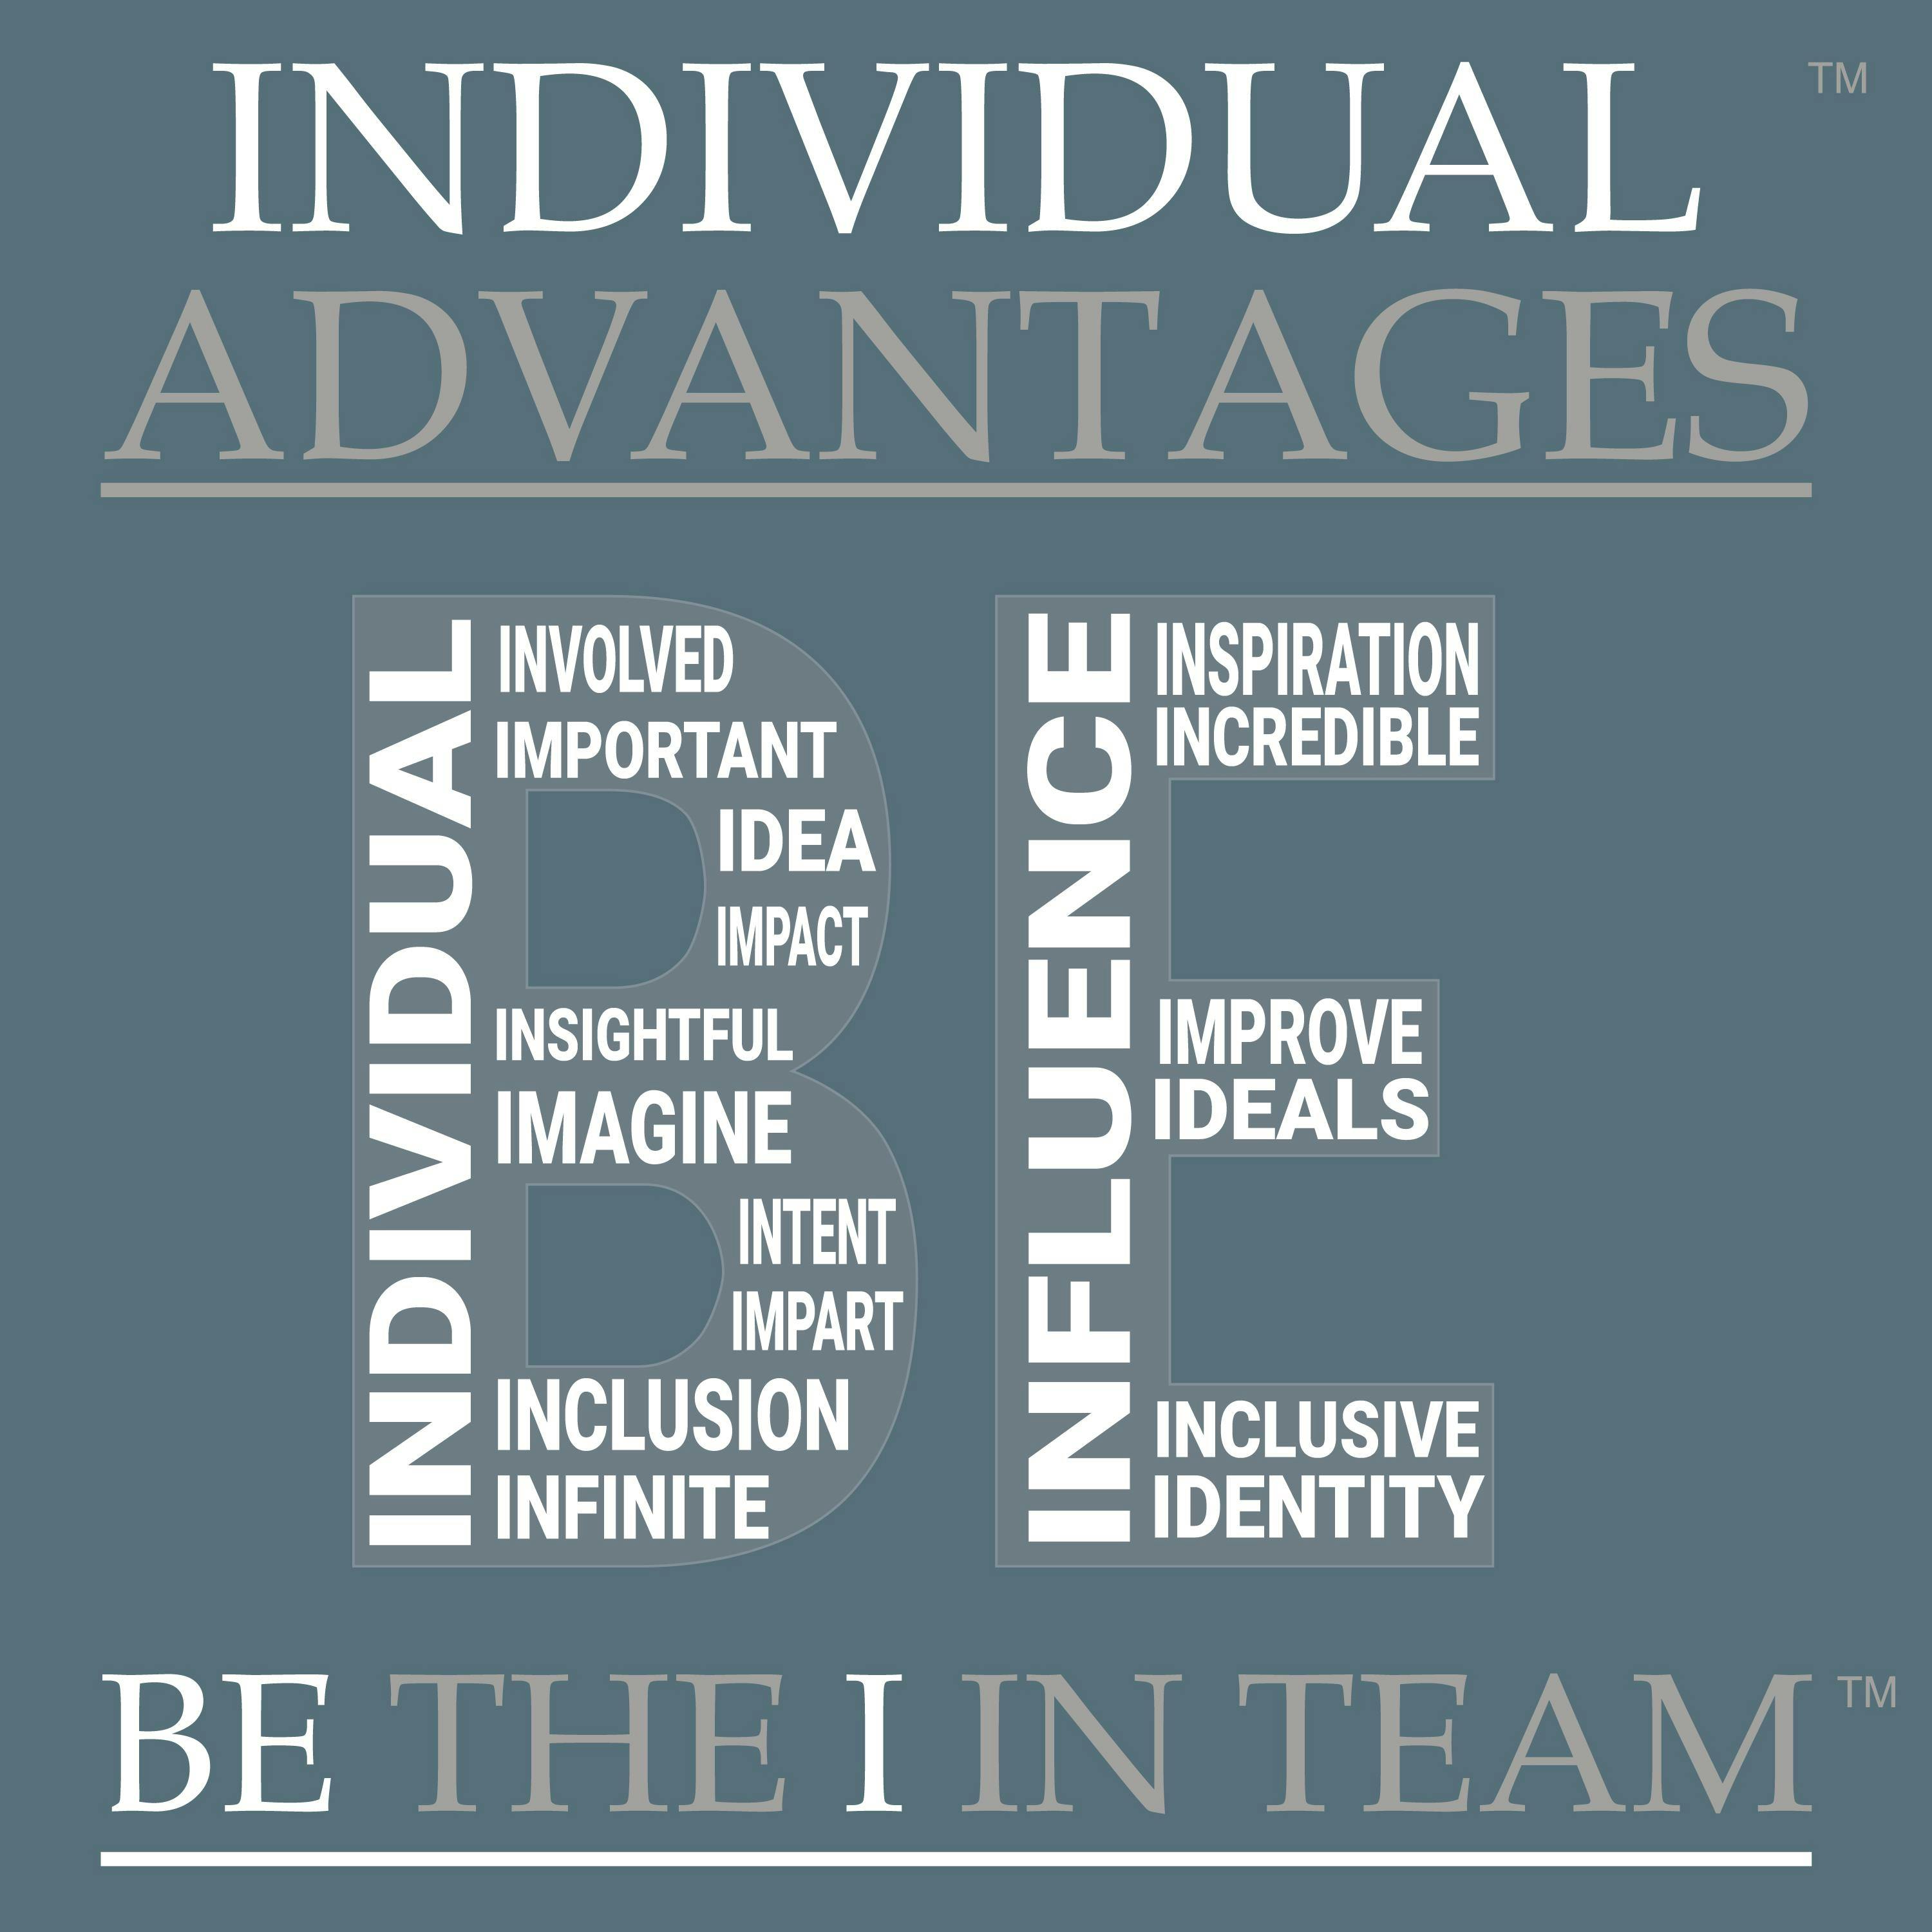 Individual Advantages: Be the "I" in Team - undefined